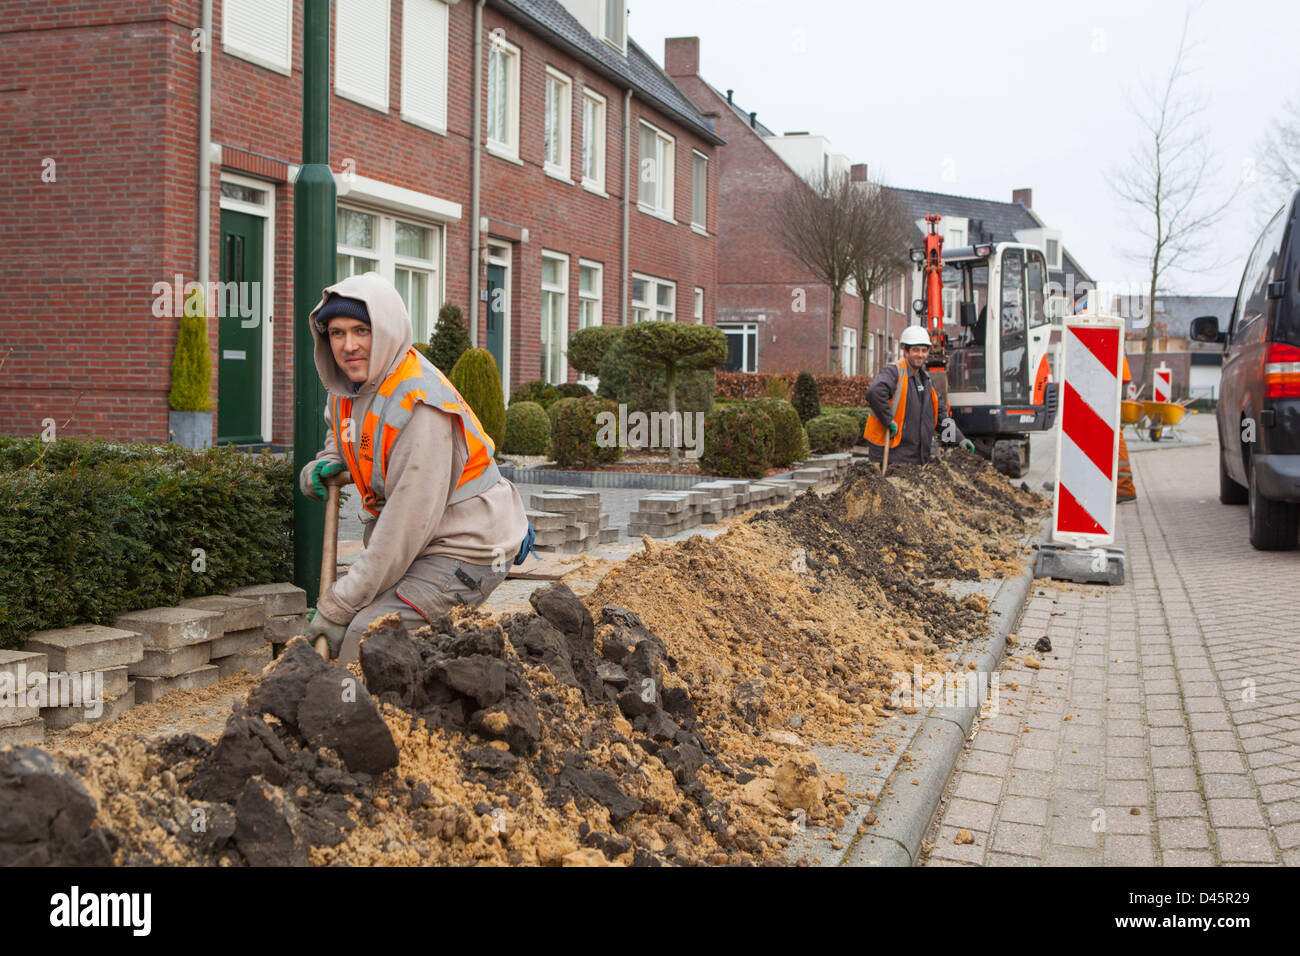 Polish migrant workers do earth work for the construction of a glass fiber infrastructure in Netherlands Stock Photo